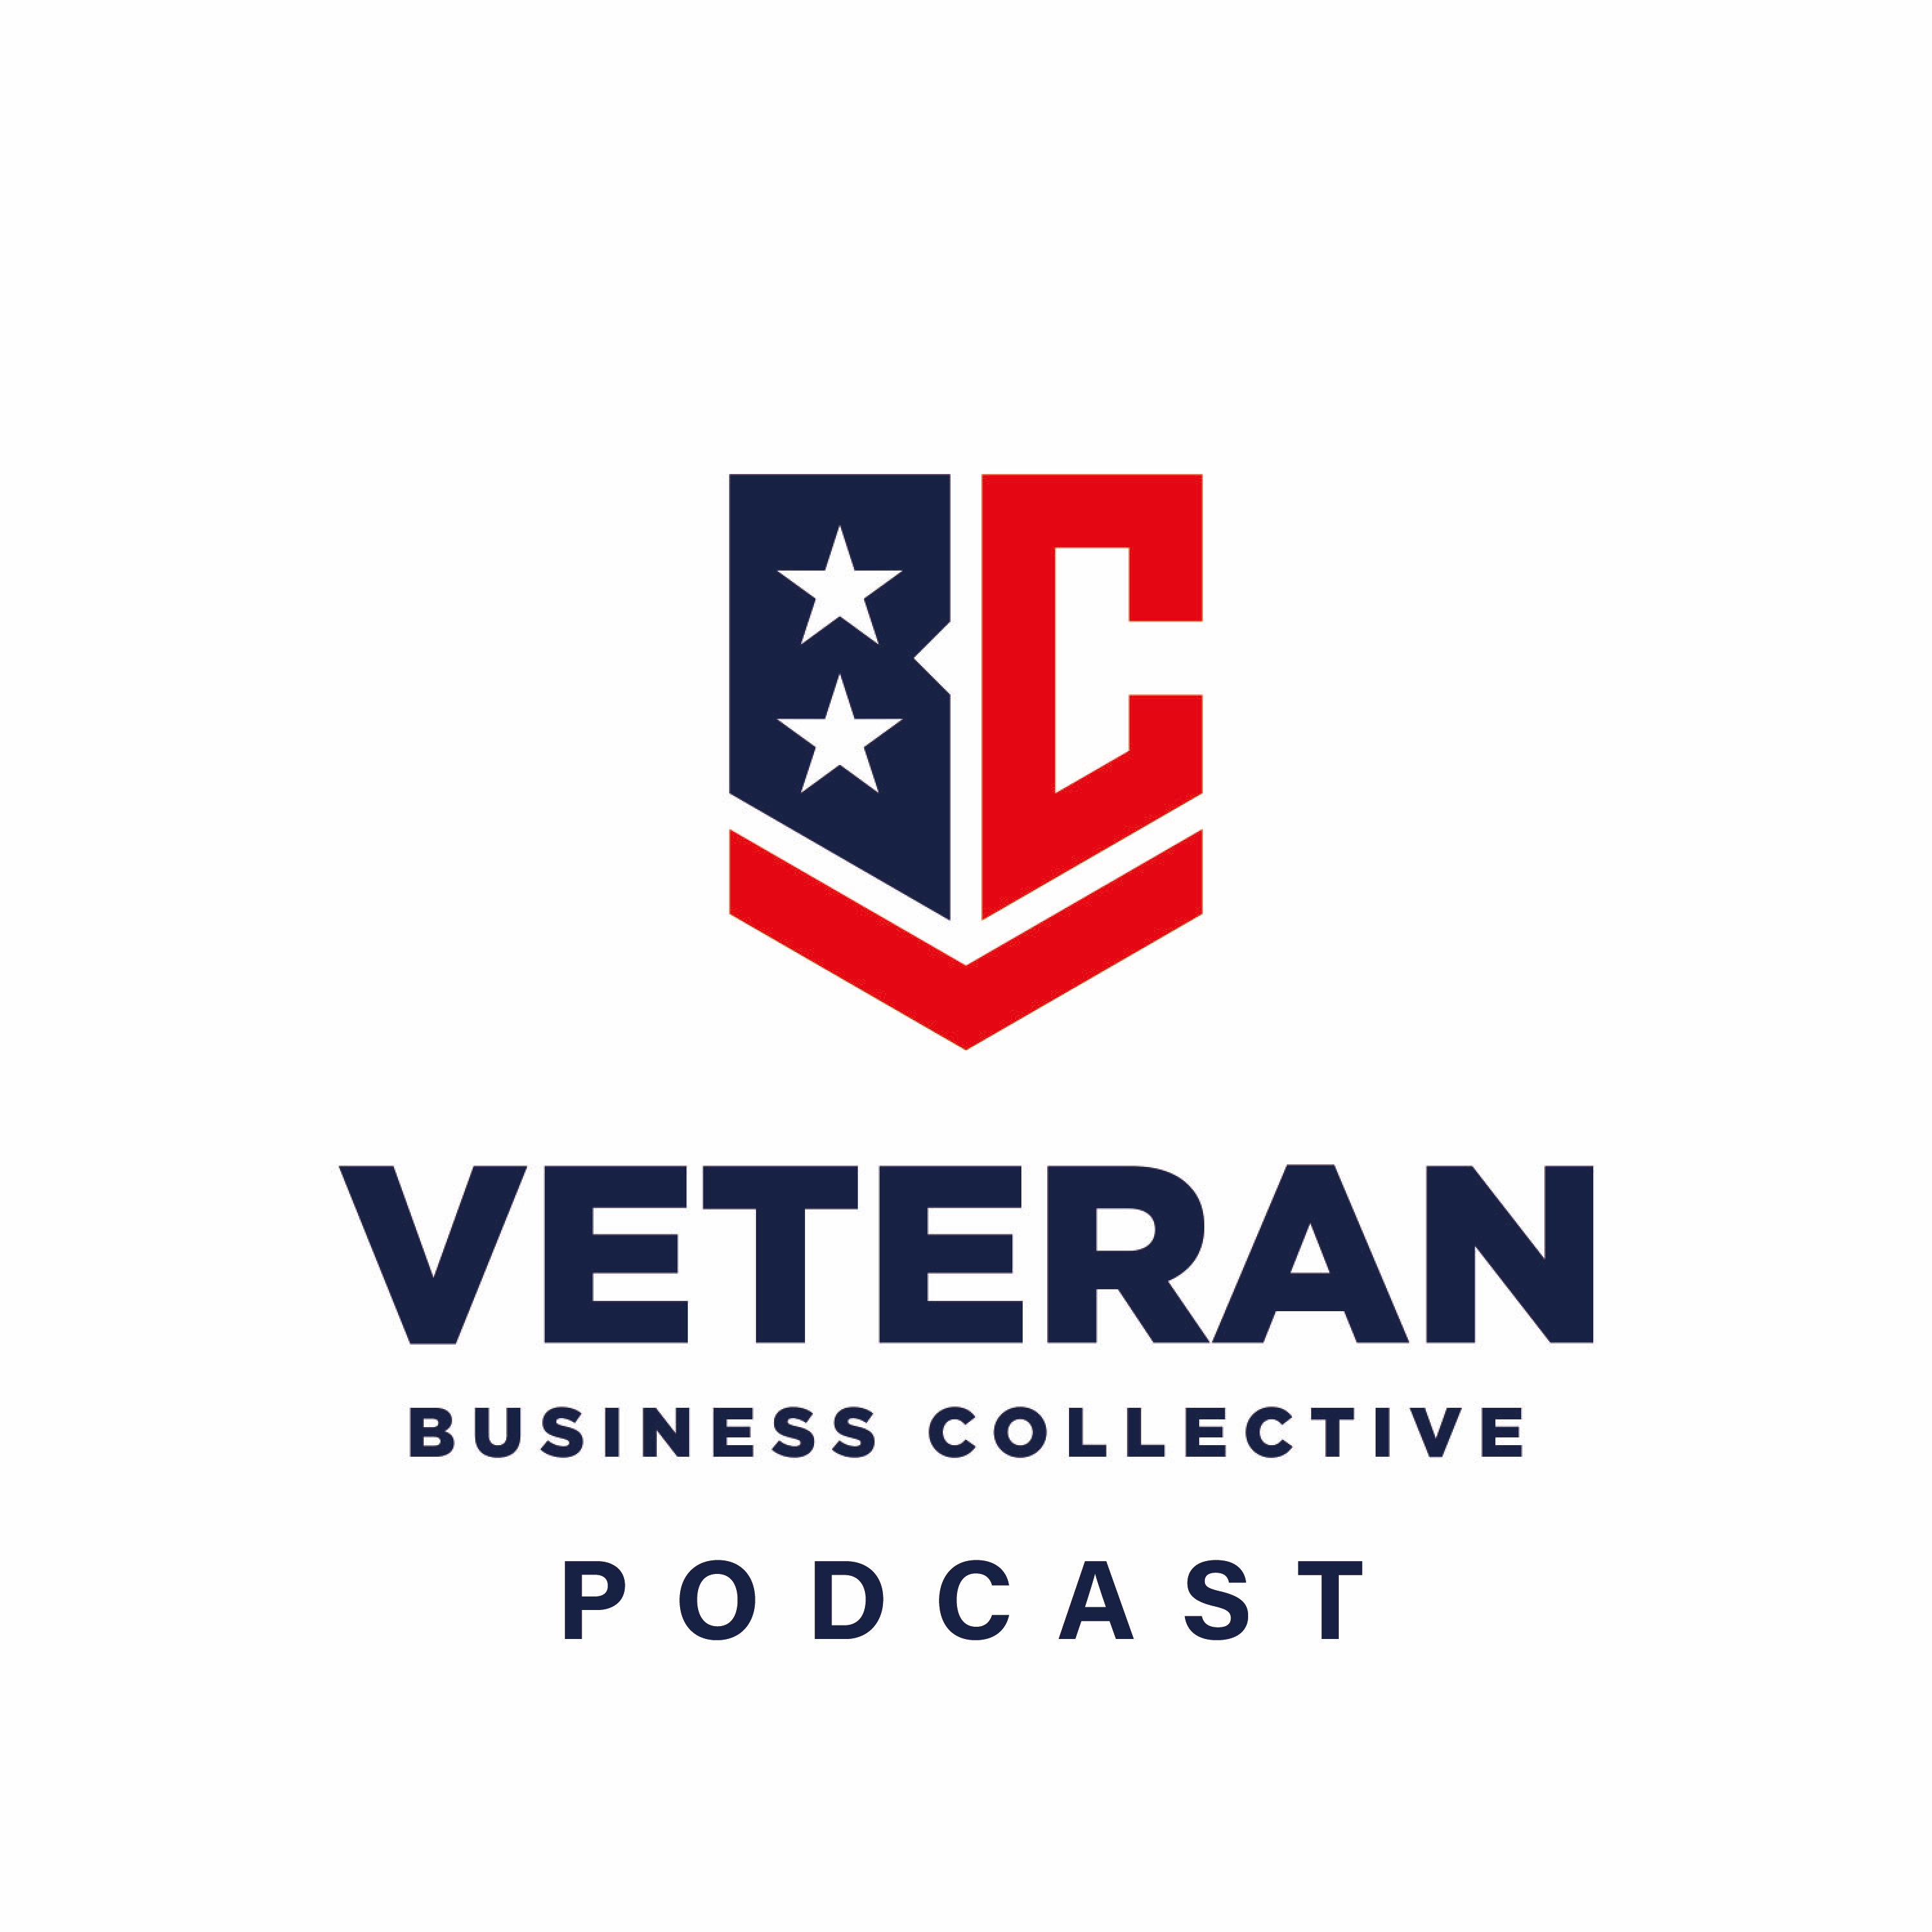 Artwork for Veterans Business Collective